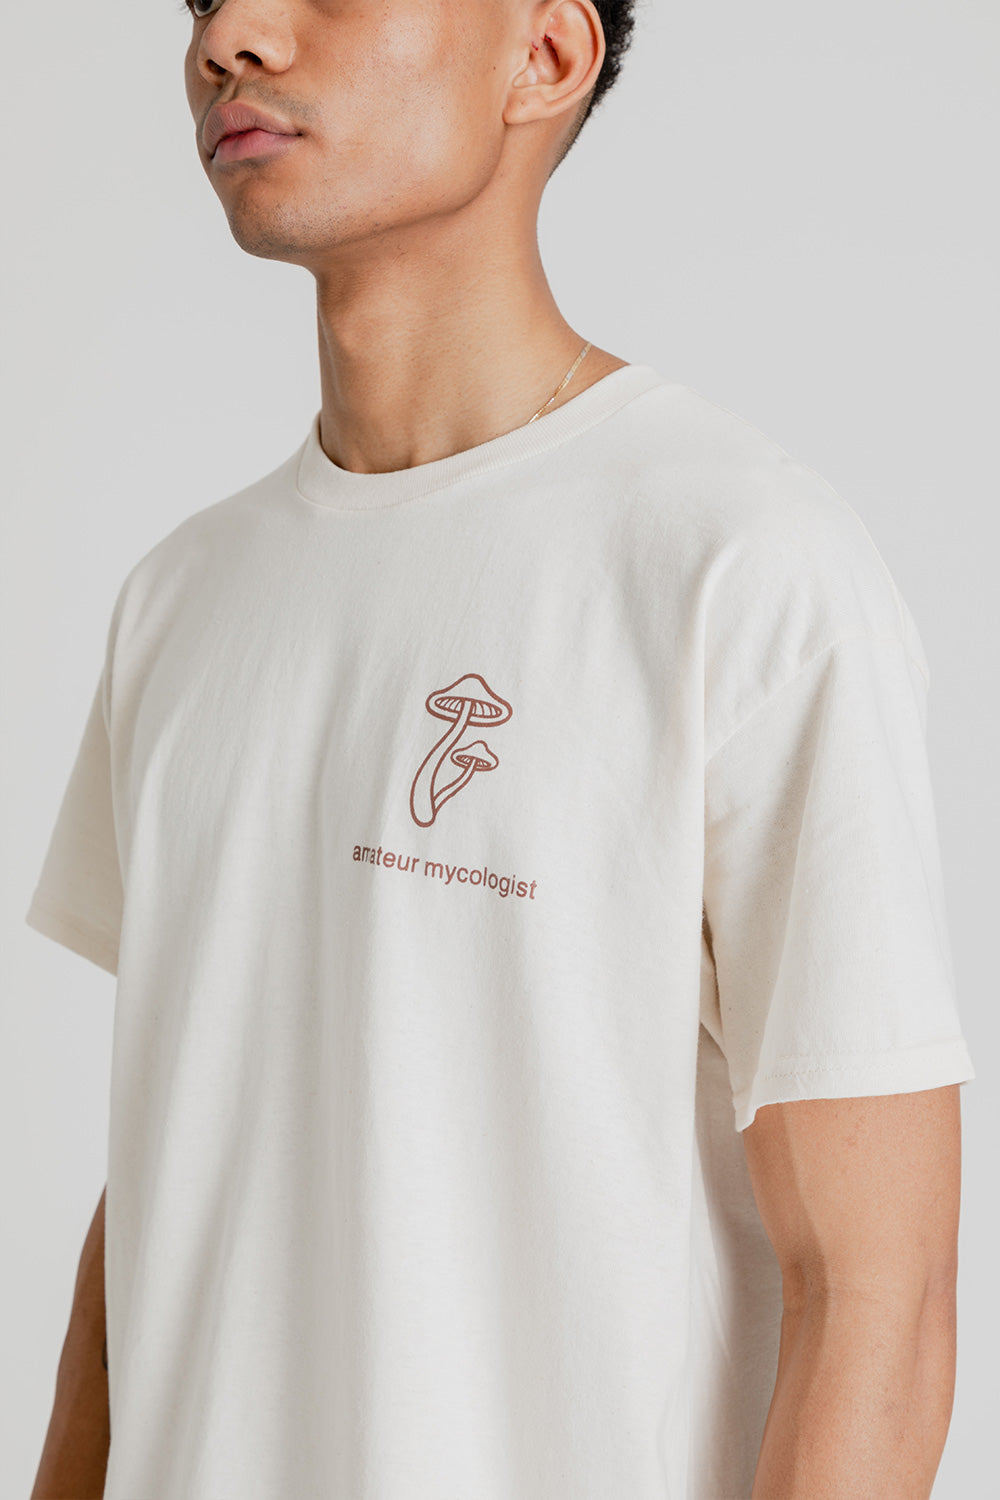 S.K. Manor Hill SS Amateur Mycologist T-Shirt in Natural